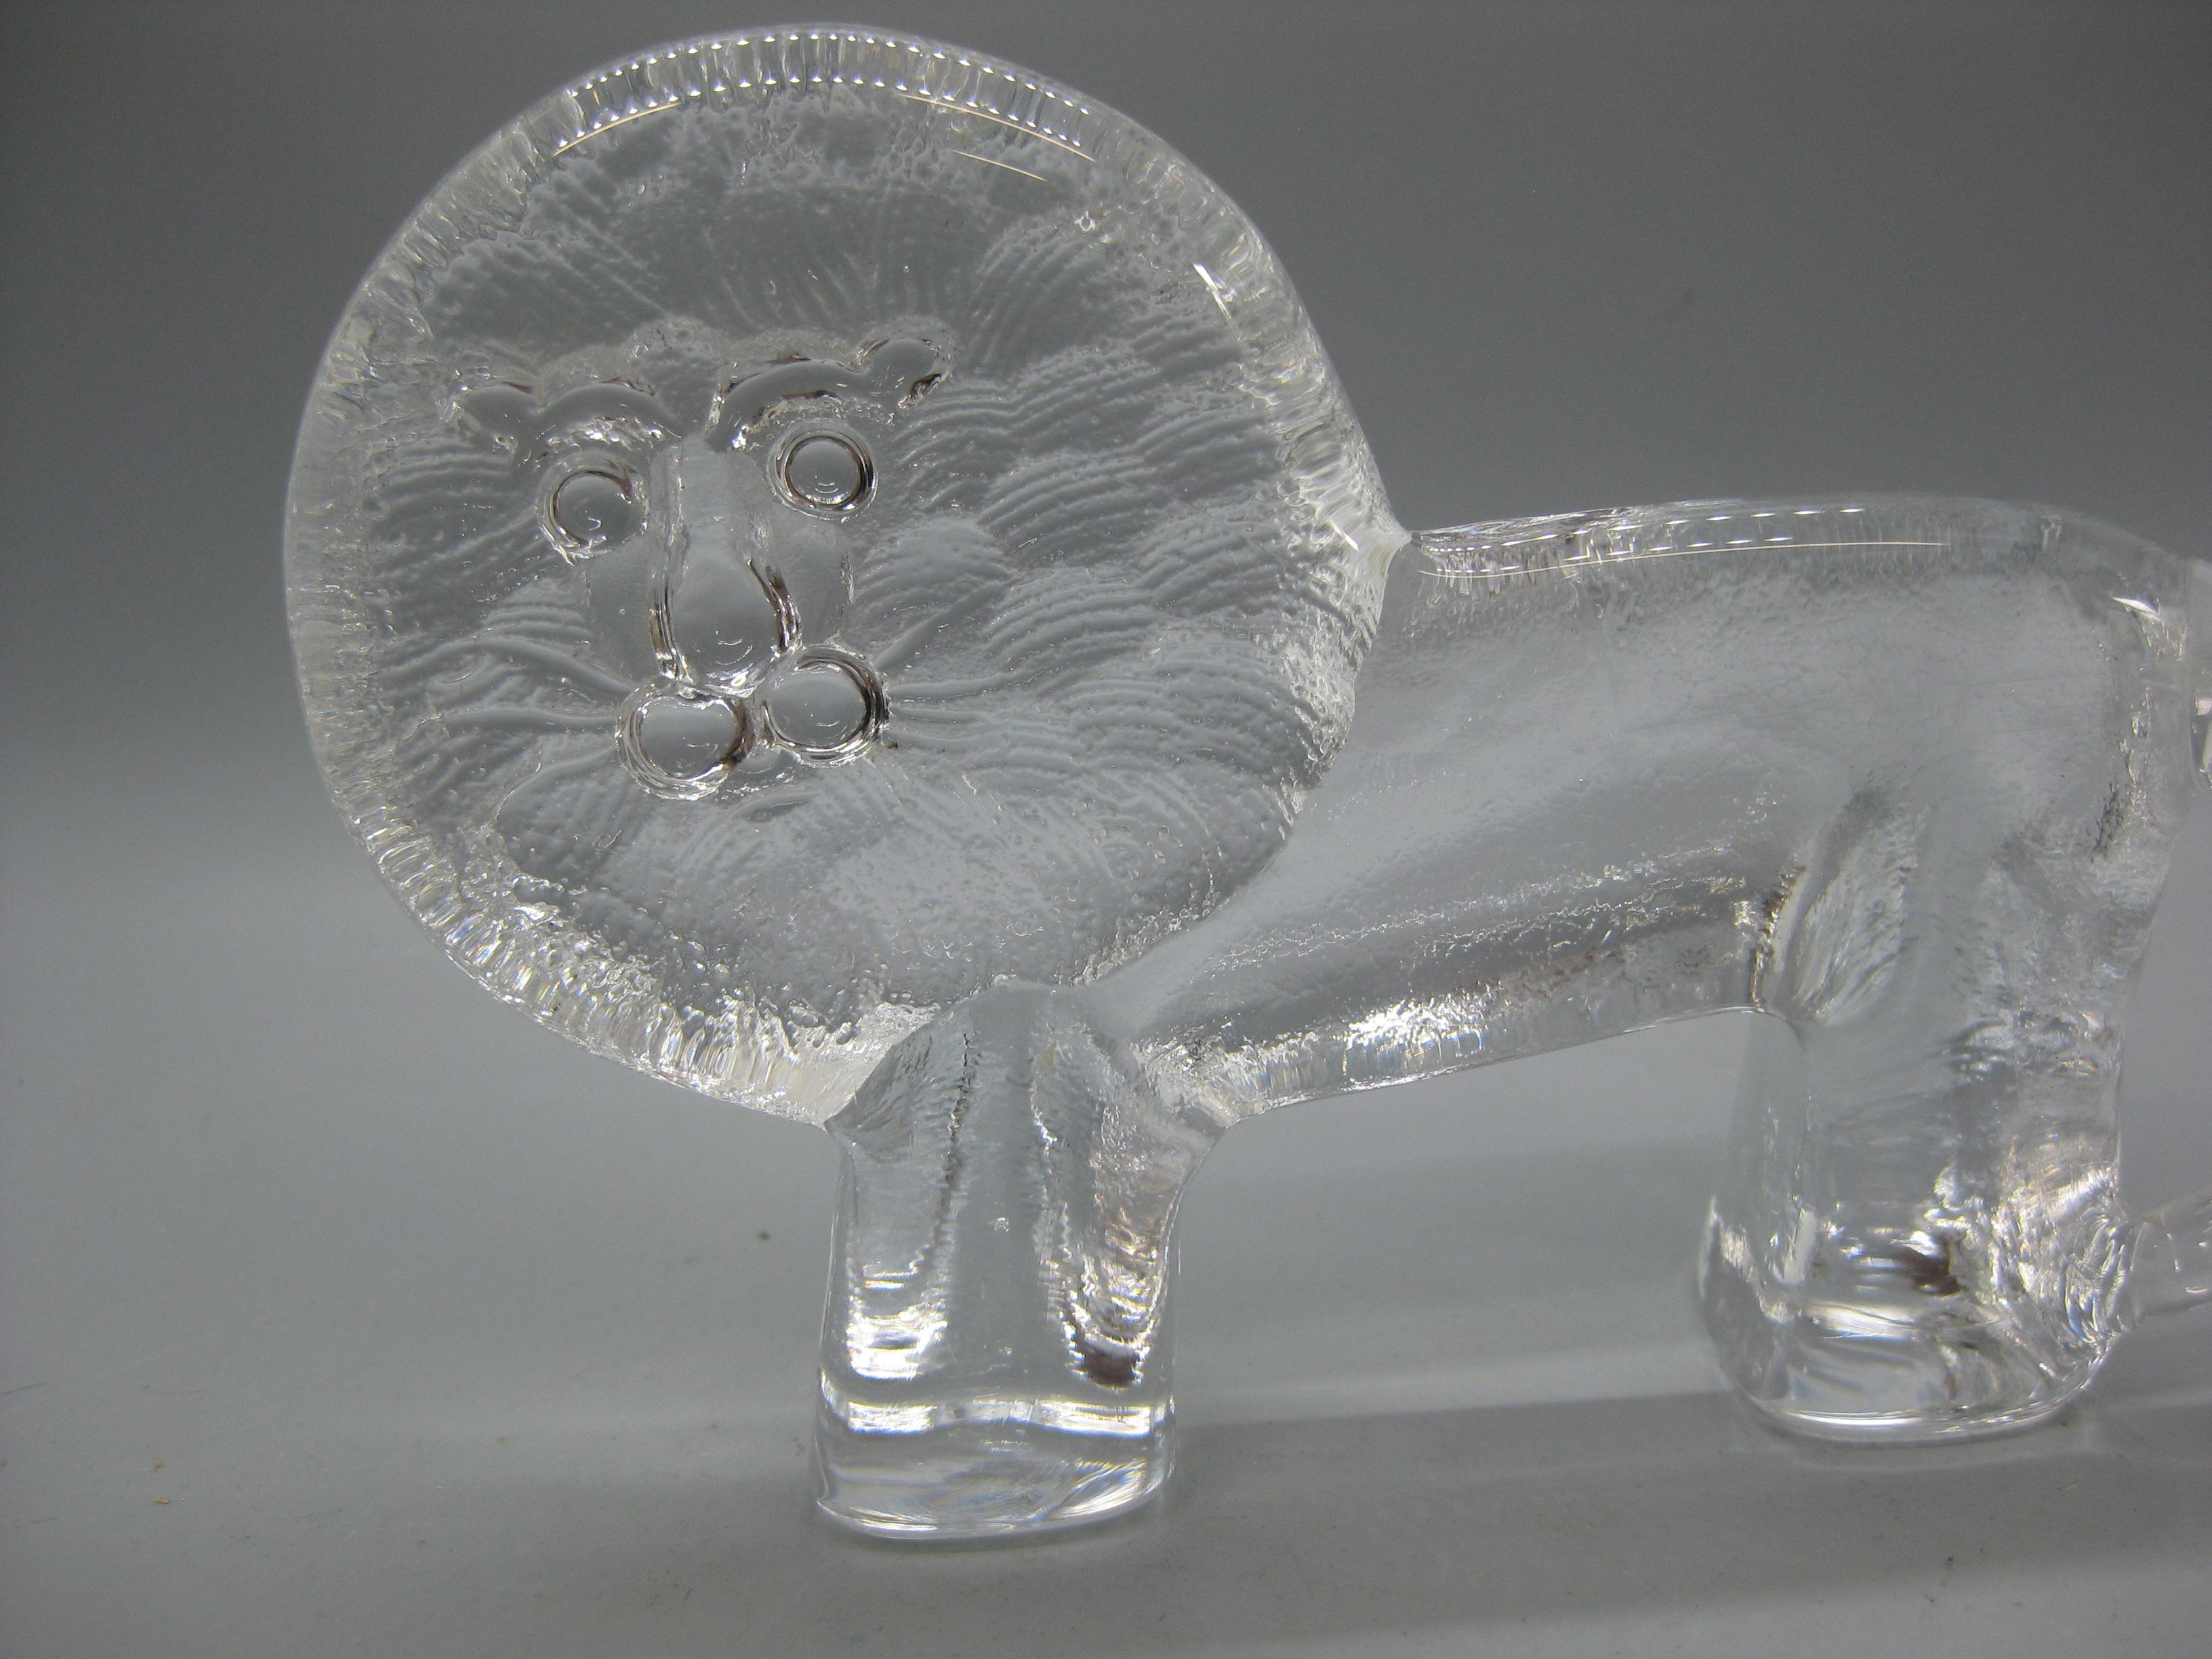 1970's Kosta Boda Lovely Lion Zoo Art Glass Figure Sculpture by Bertil Vallien In Excellent Condition For Sale In San Diego, CA